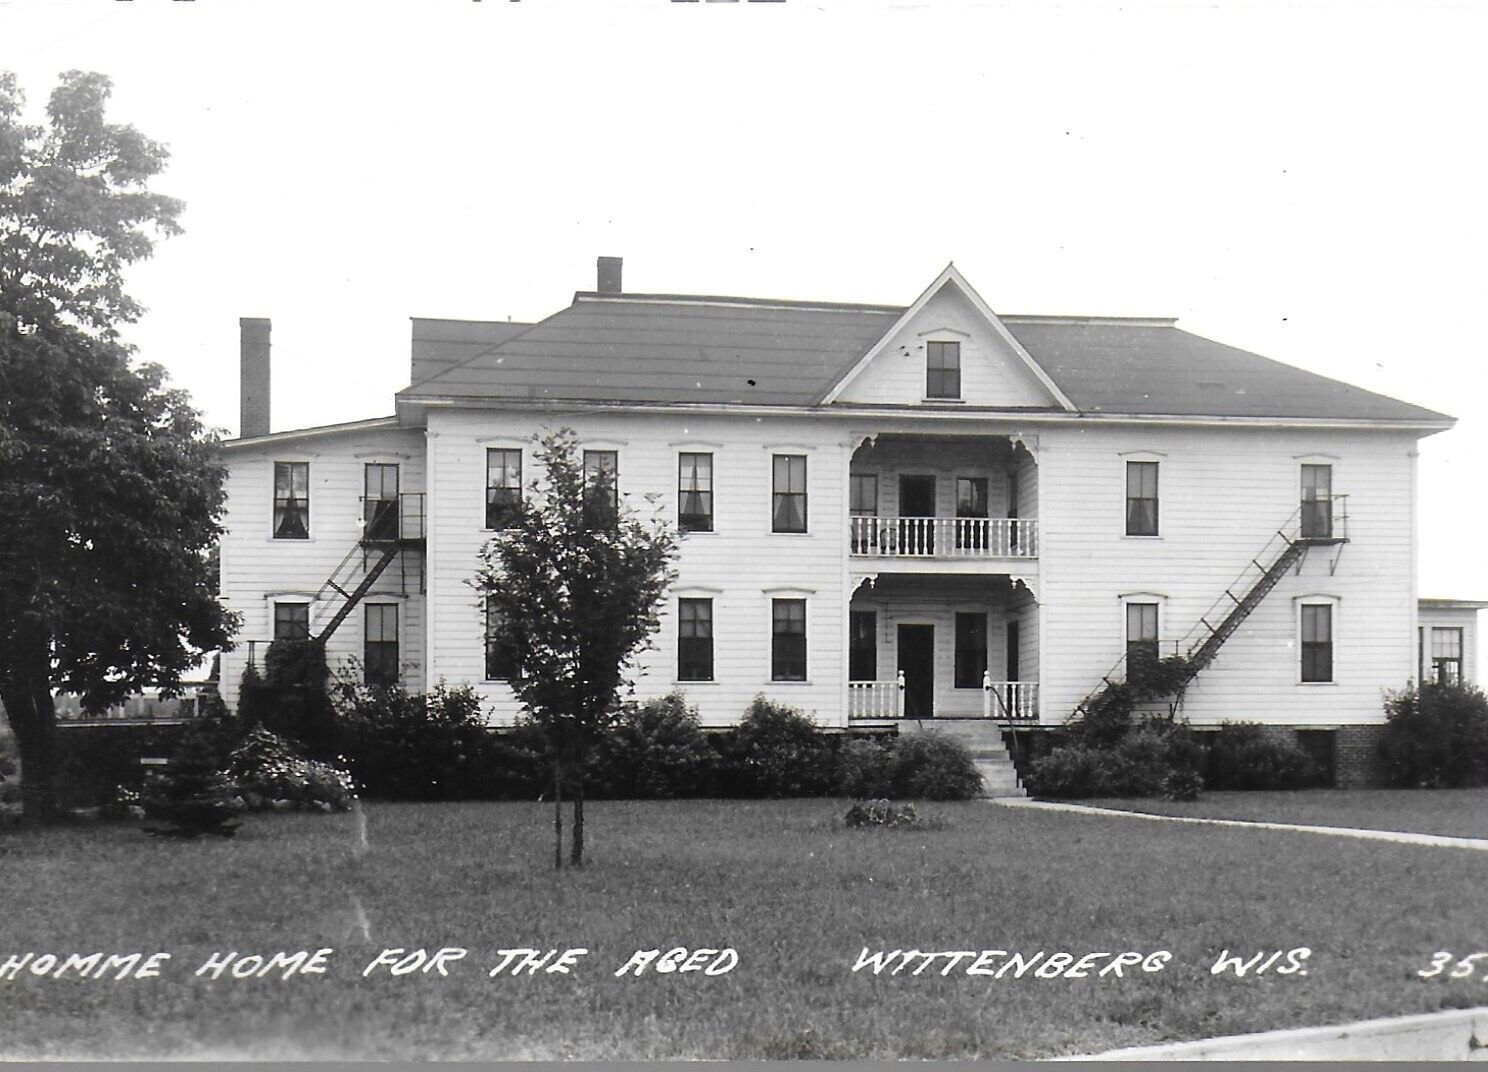 RPPC Wittenberg, WI - Homme Home for the Aged